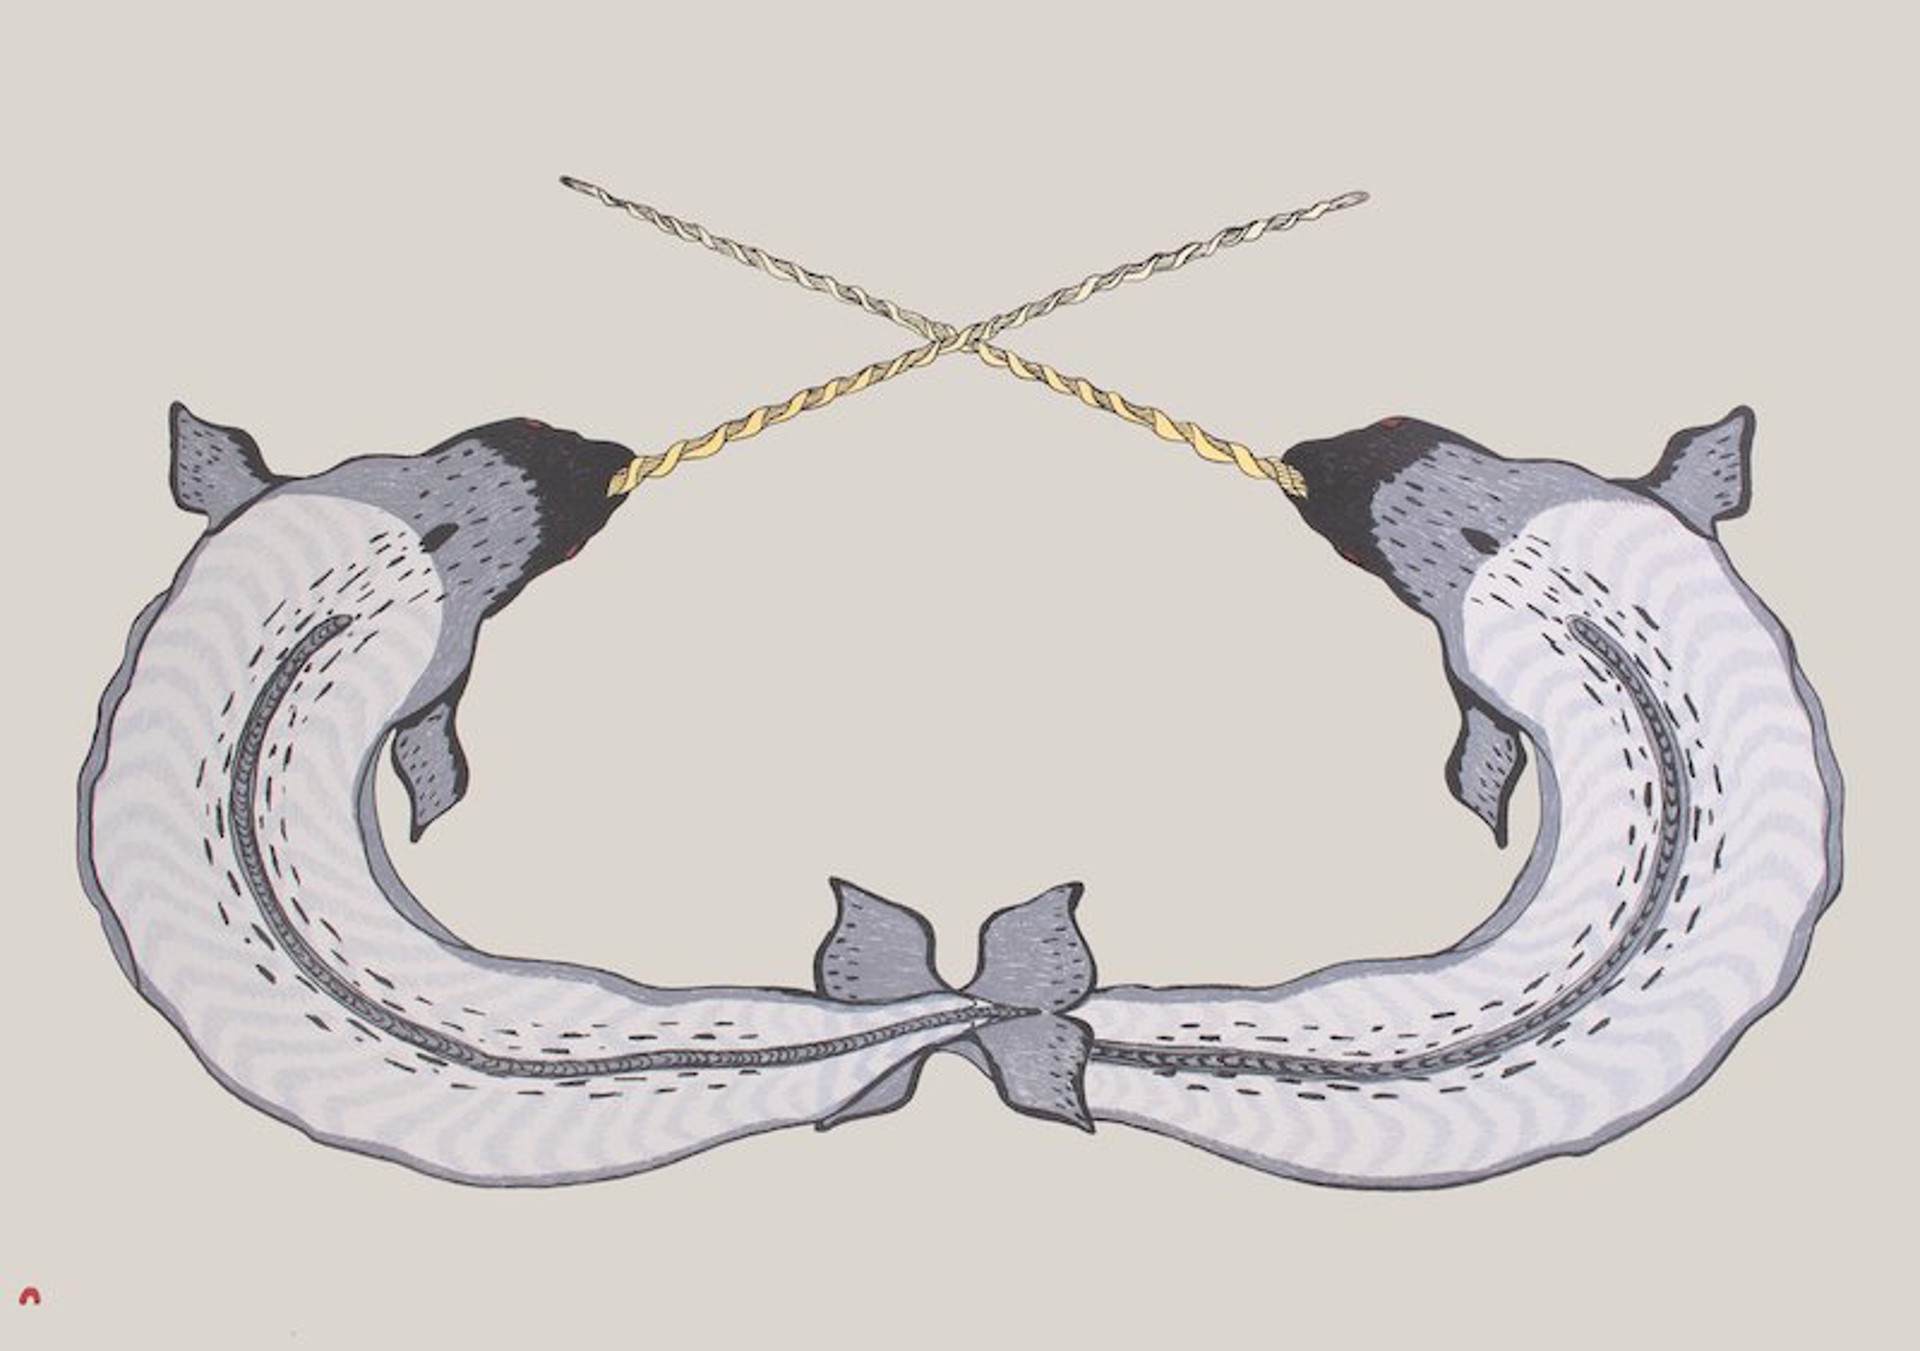 Sparring Narwhals by Quvianaqtuk Pudlat